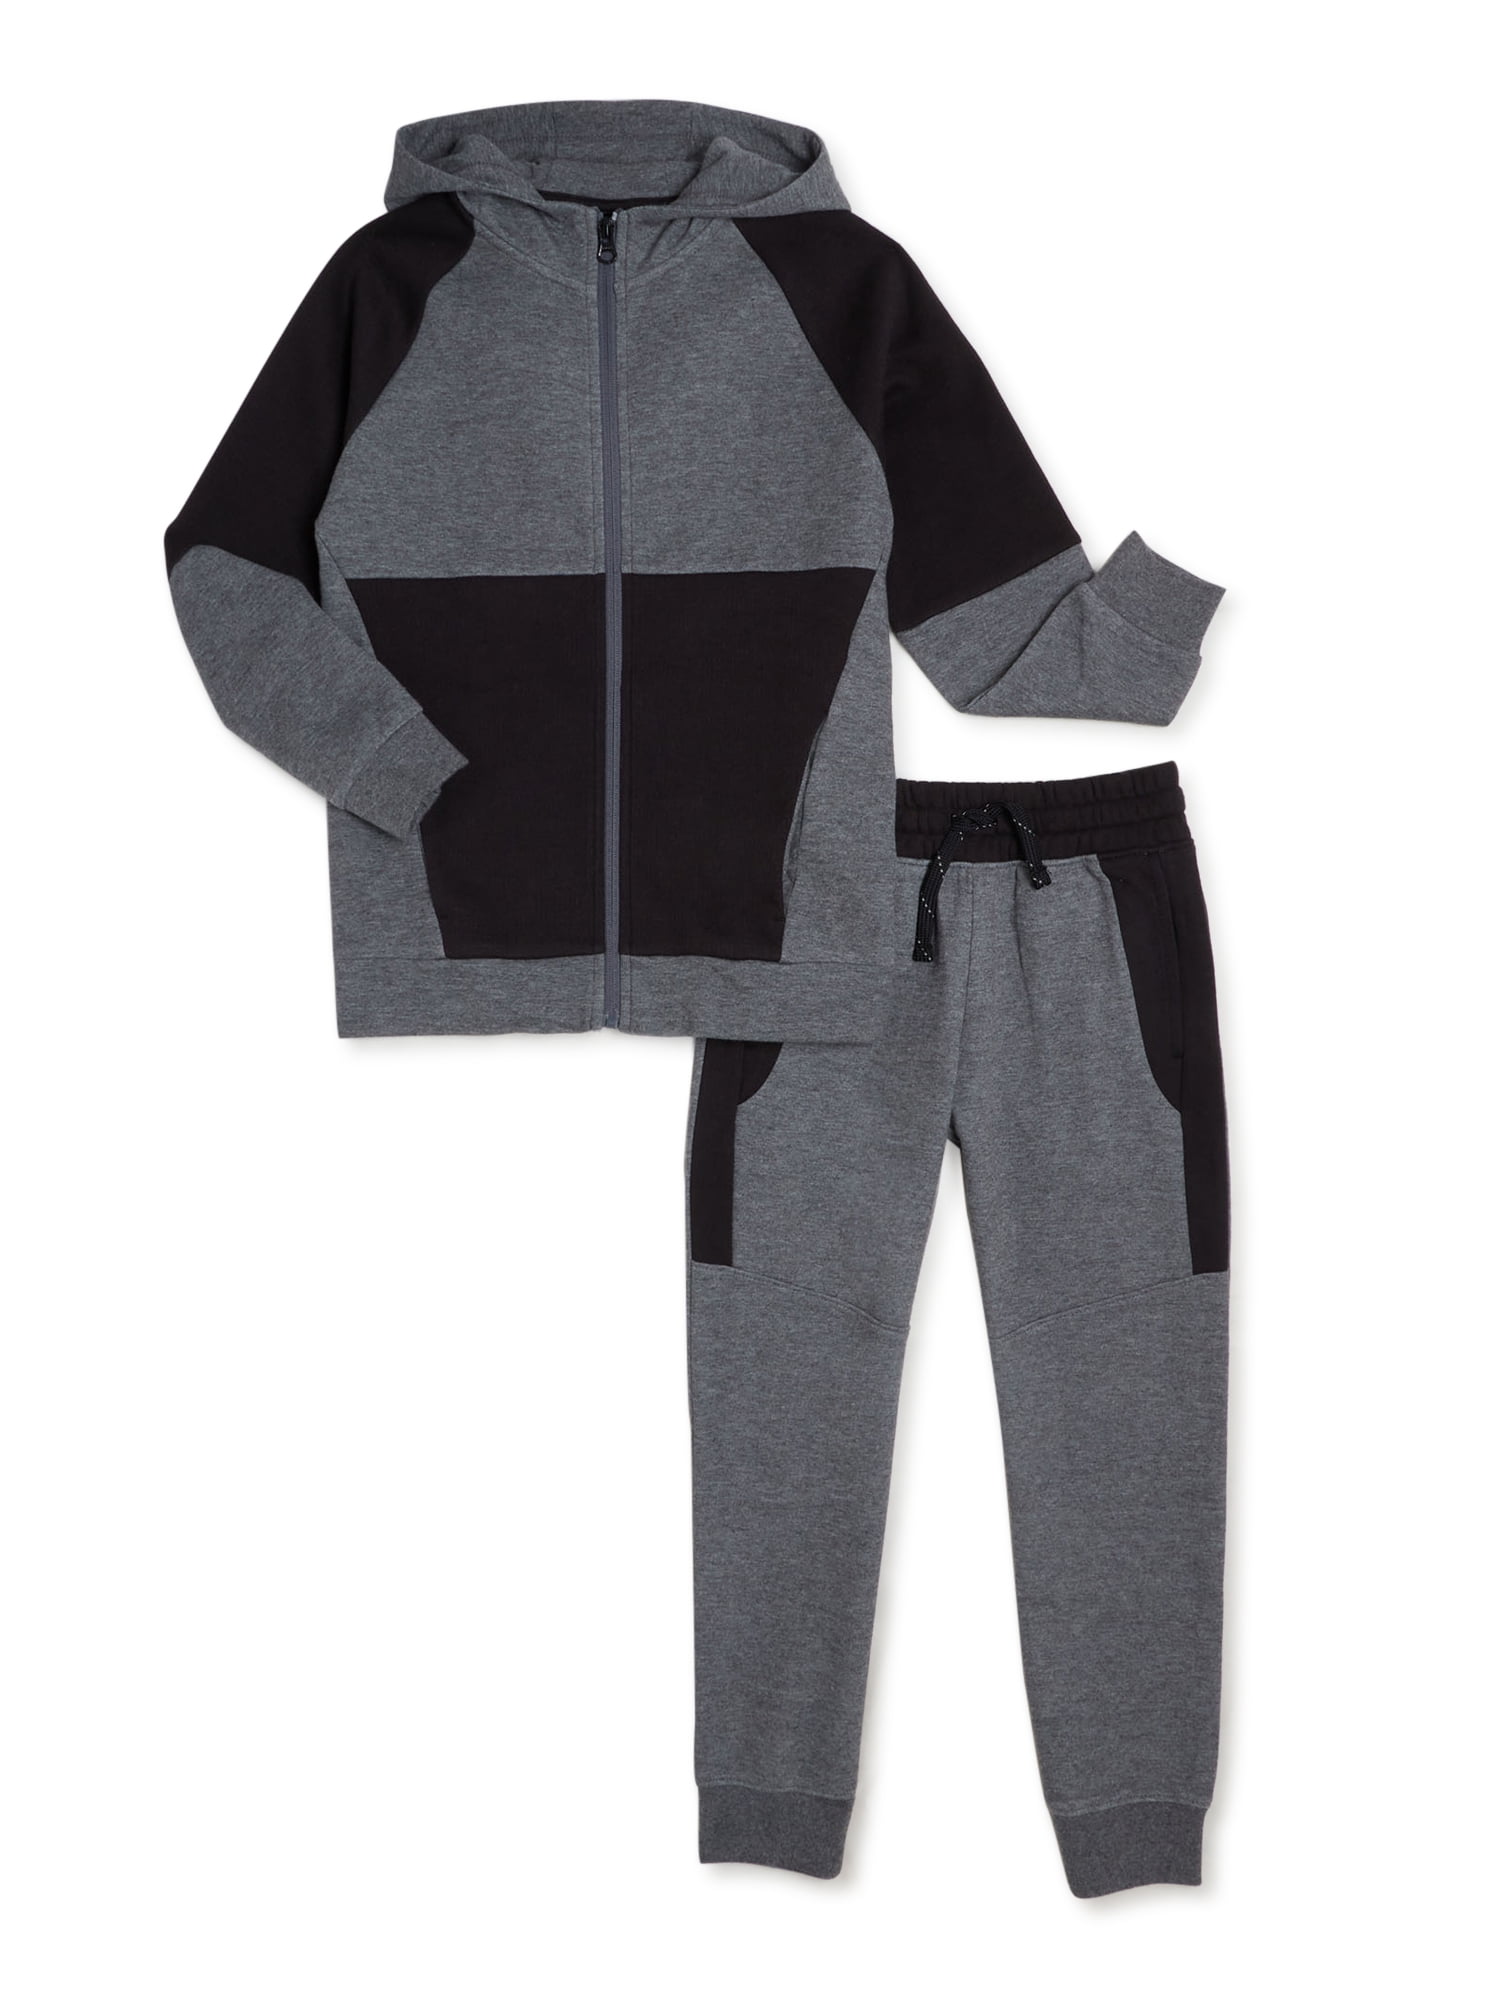 Fleece Pullover Hoodie Sweatshirt and Sweatpants Outfit Beverly Hills Polo Club Boys' Jogger Set 